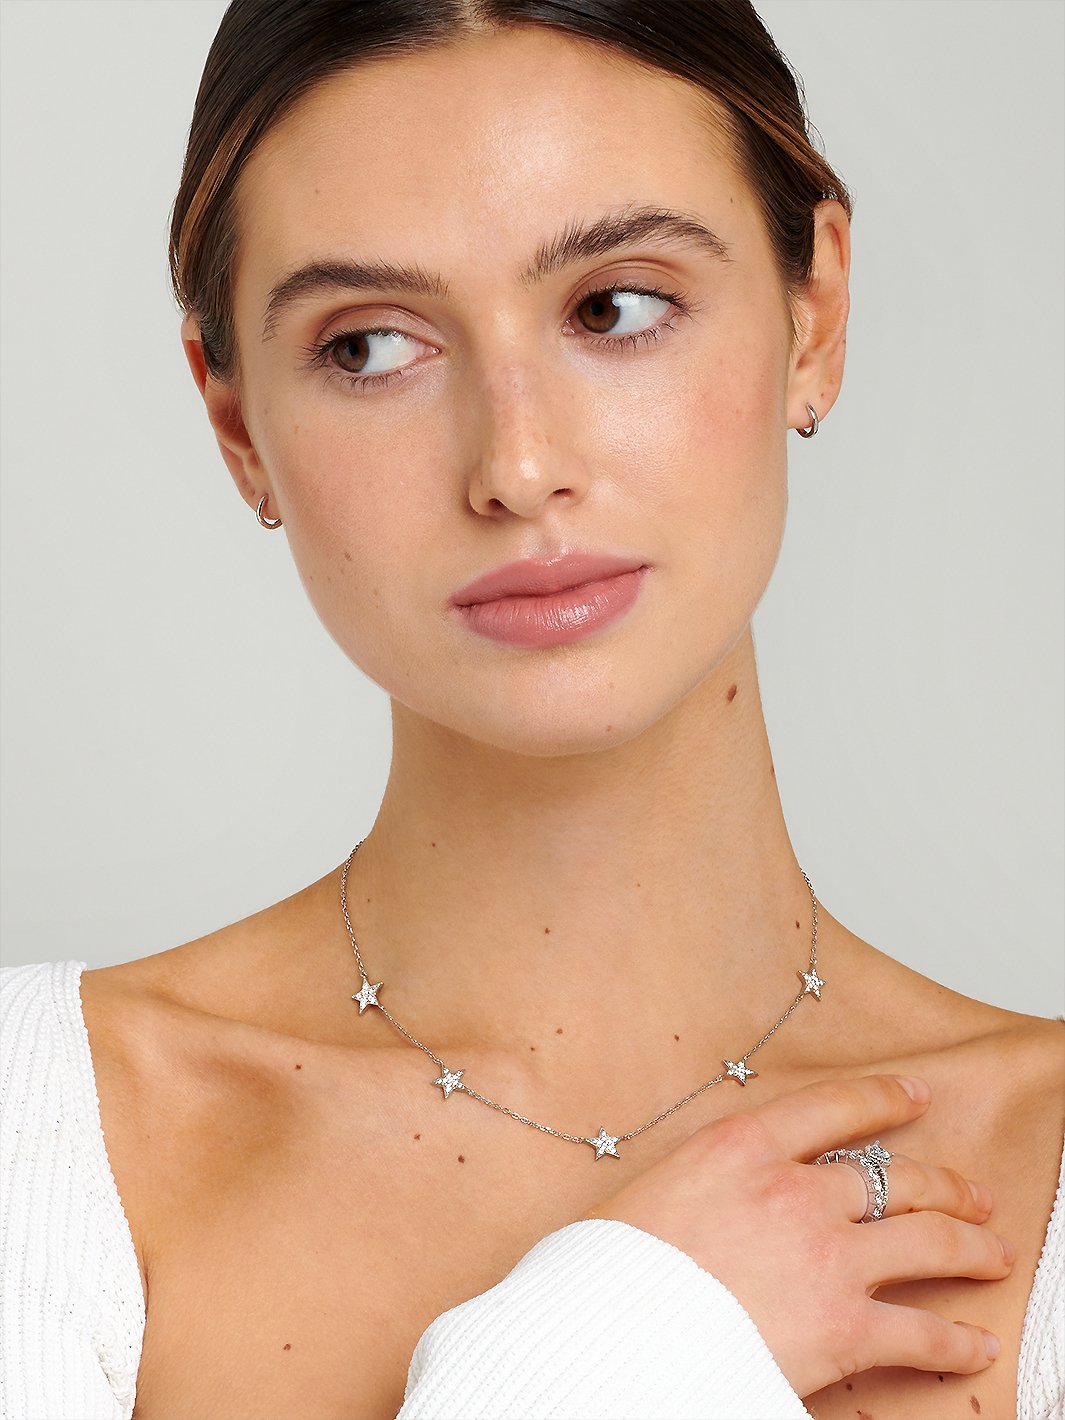 Model wearing a sterling silver necklace with five star charms.